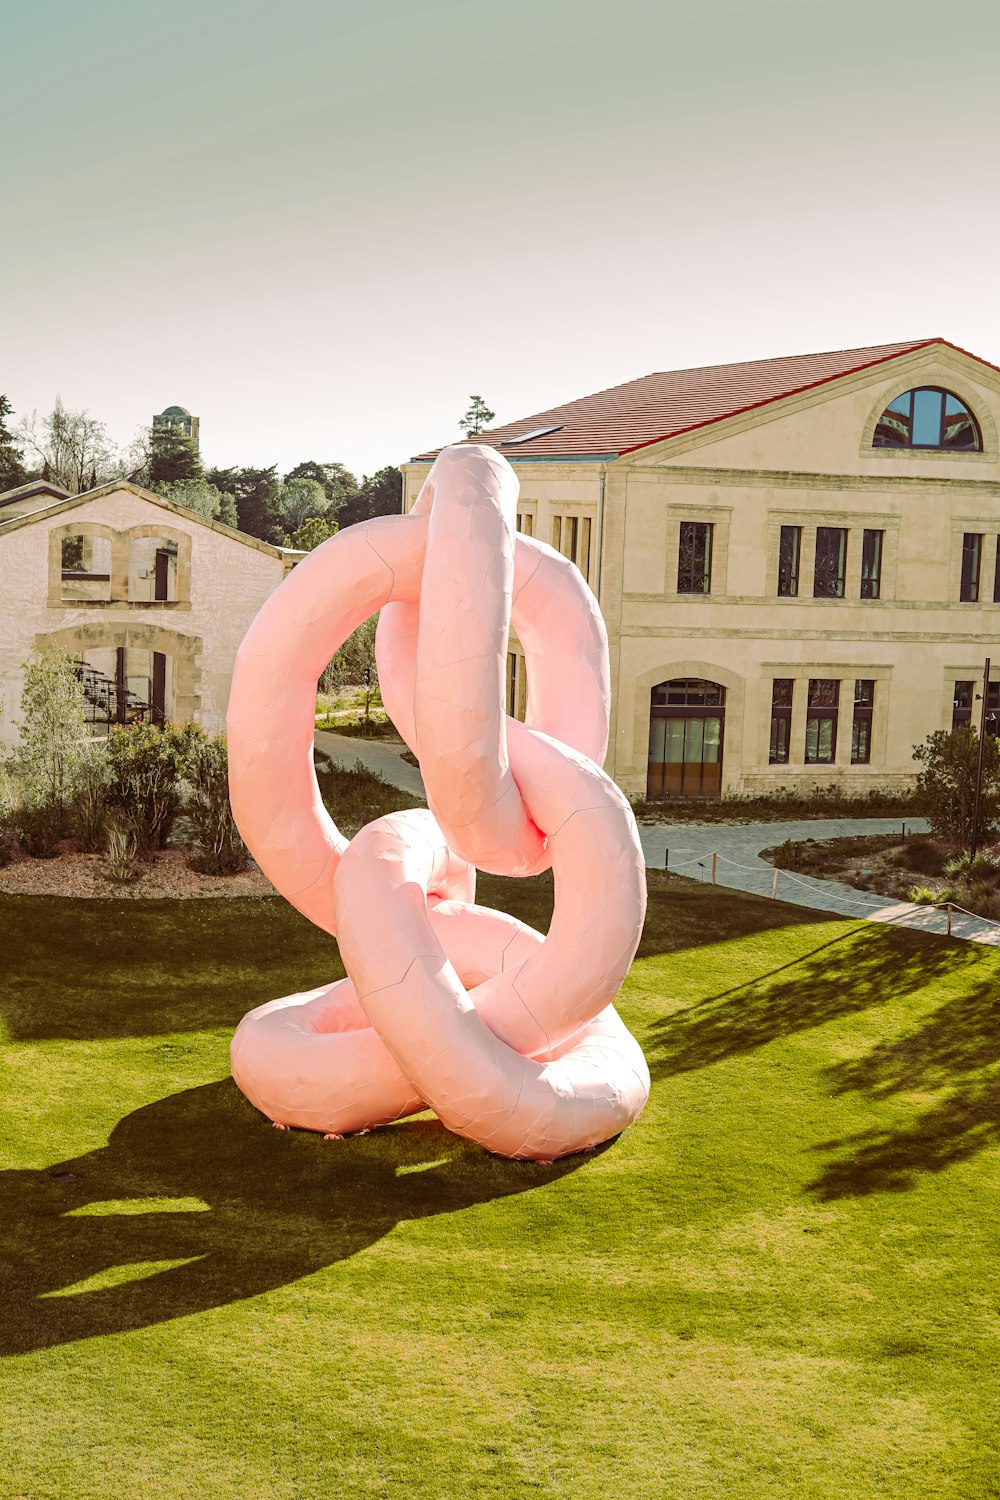 a large pink sculpture in the middle of a lawn